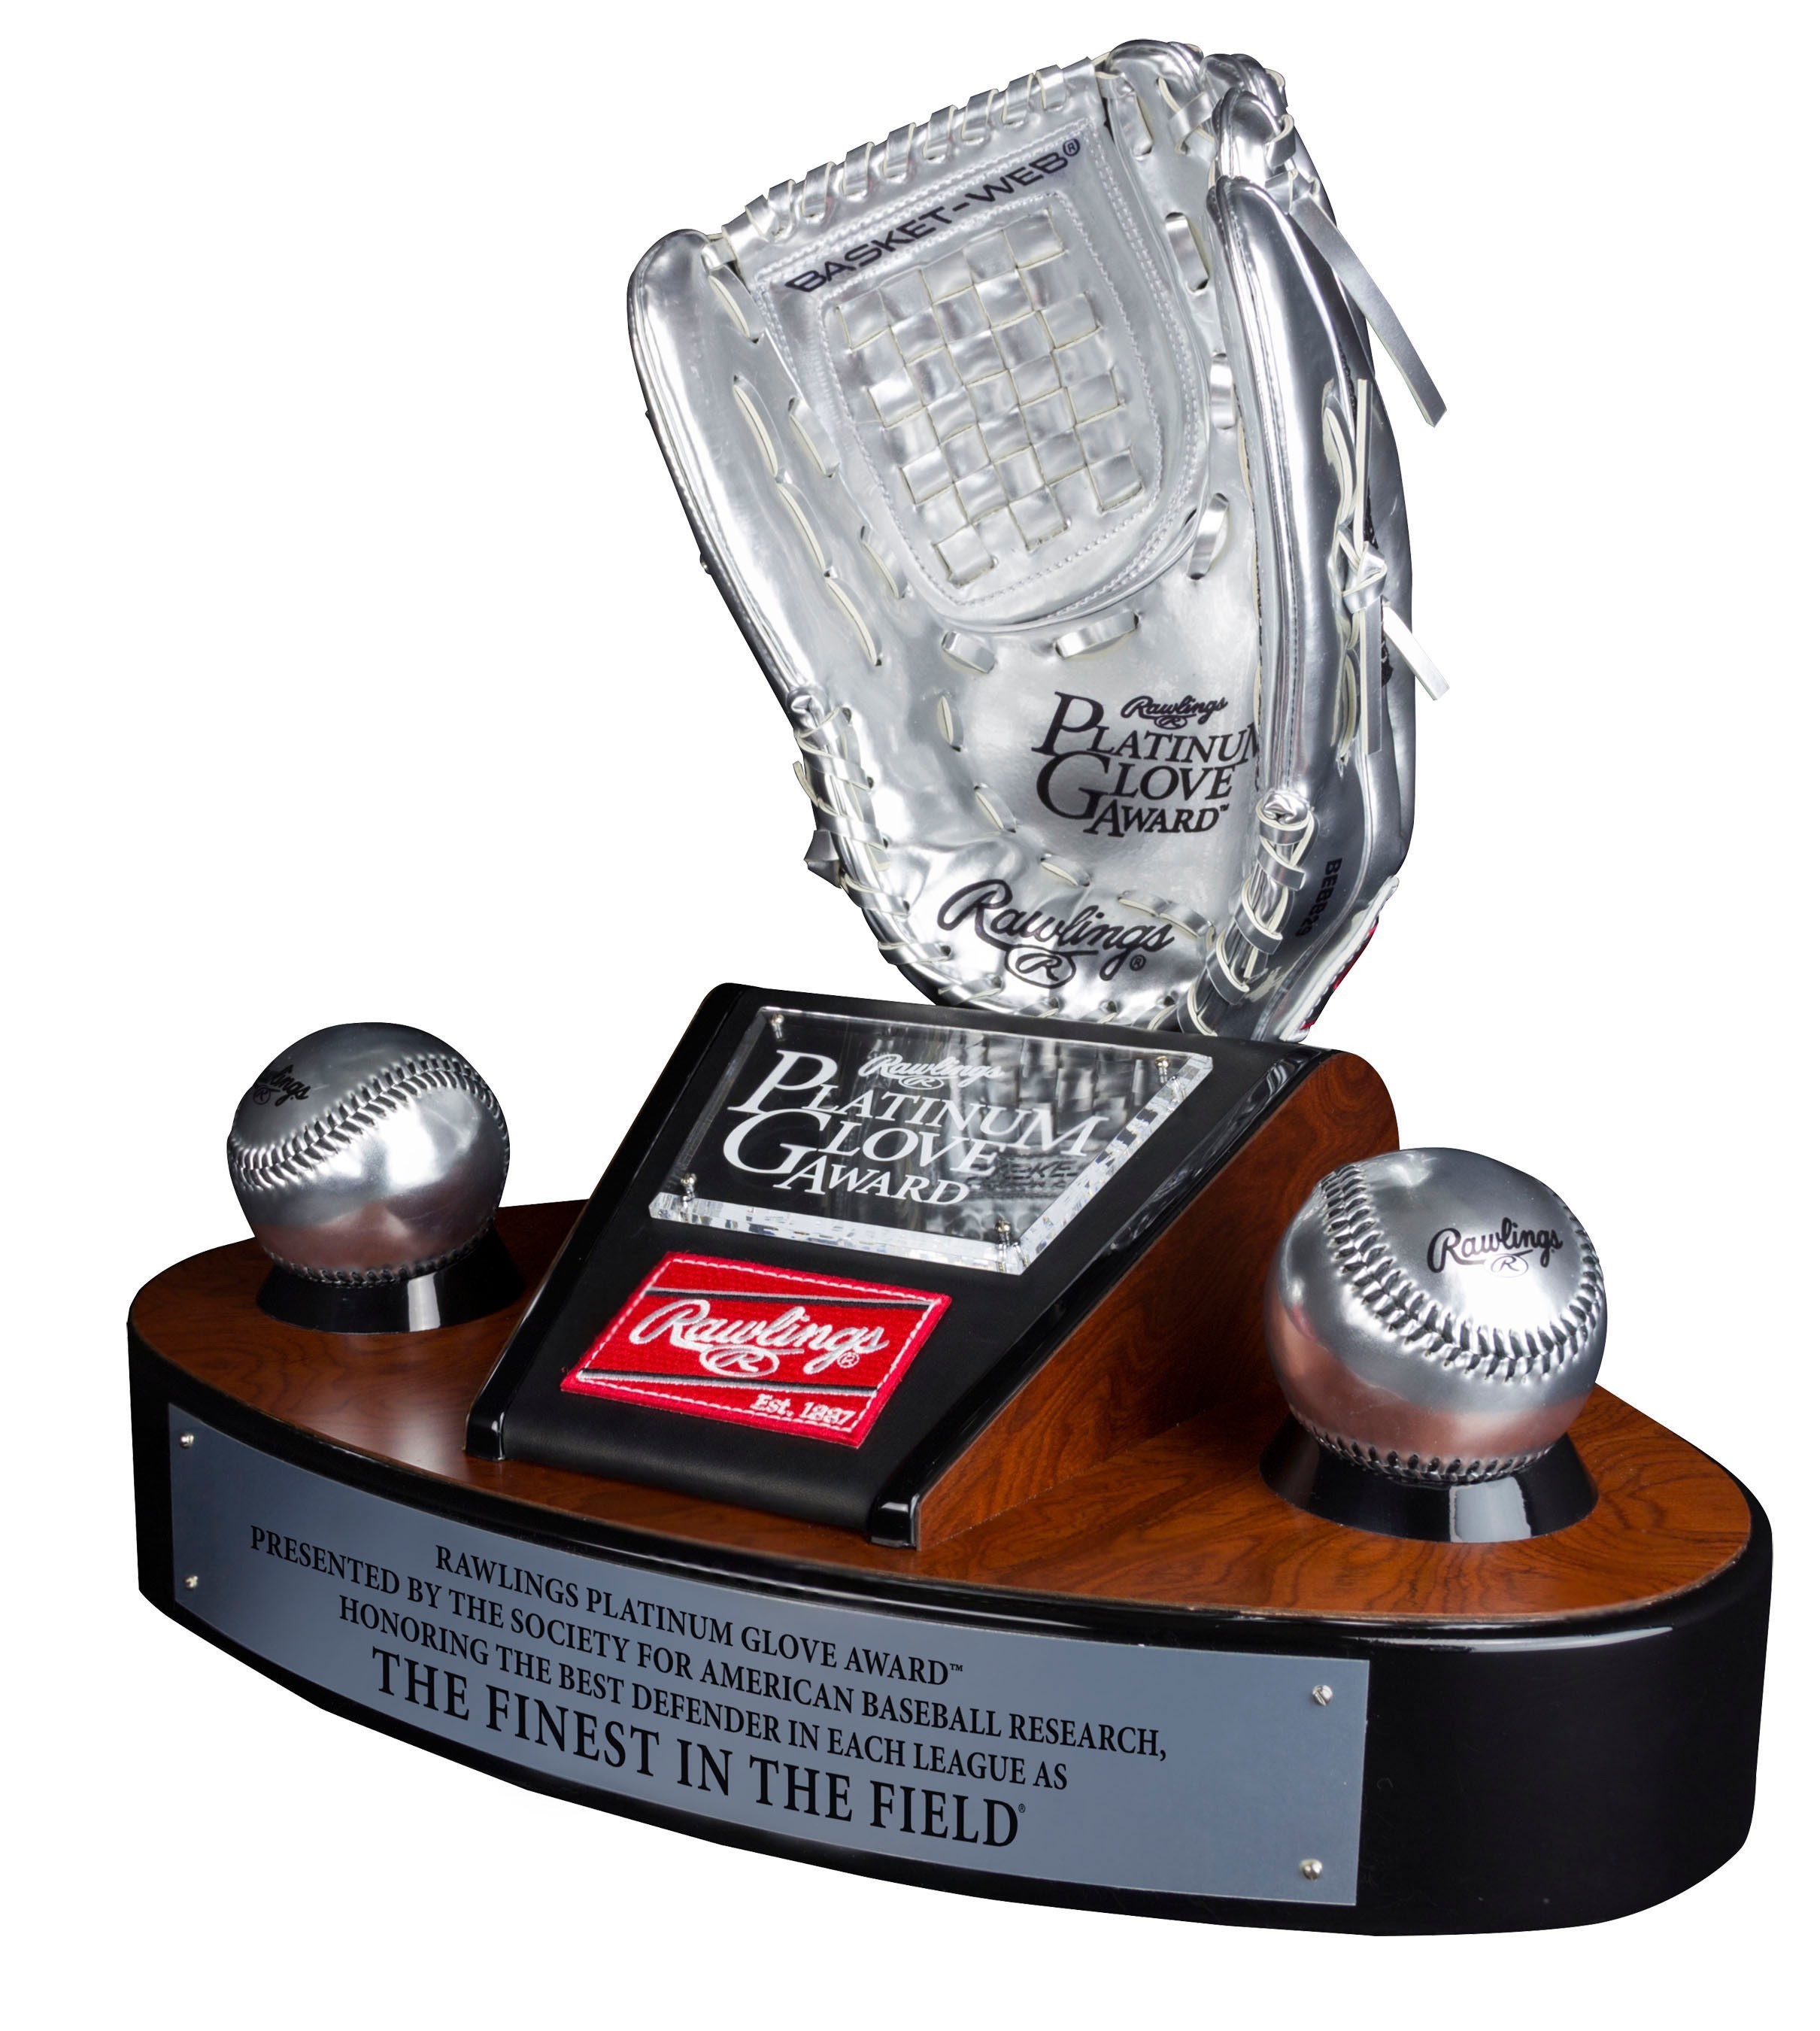 The 2014 Rawlings Platinum Glove Award presented by SABR trophy.